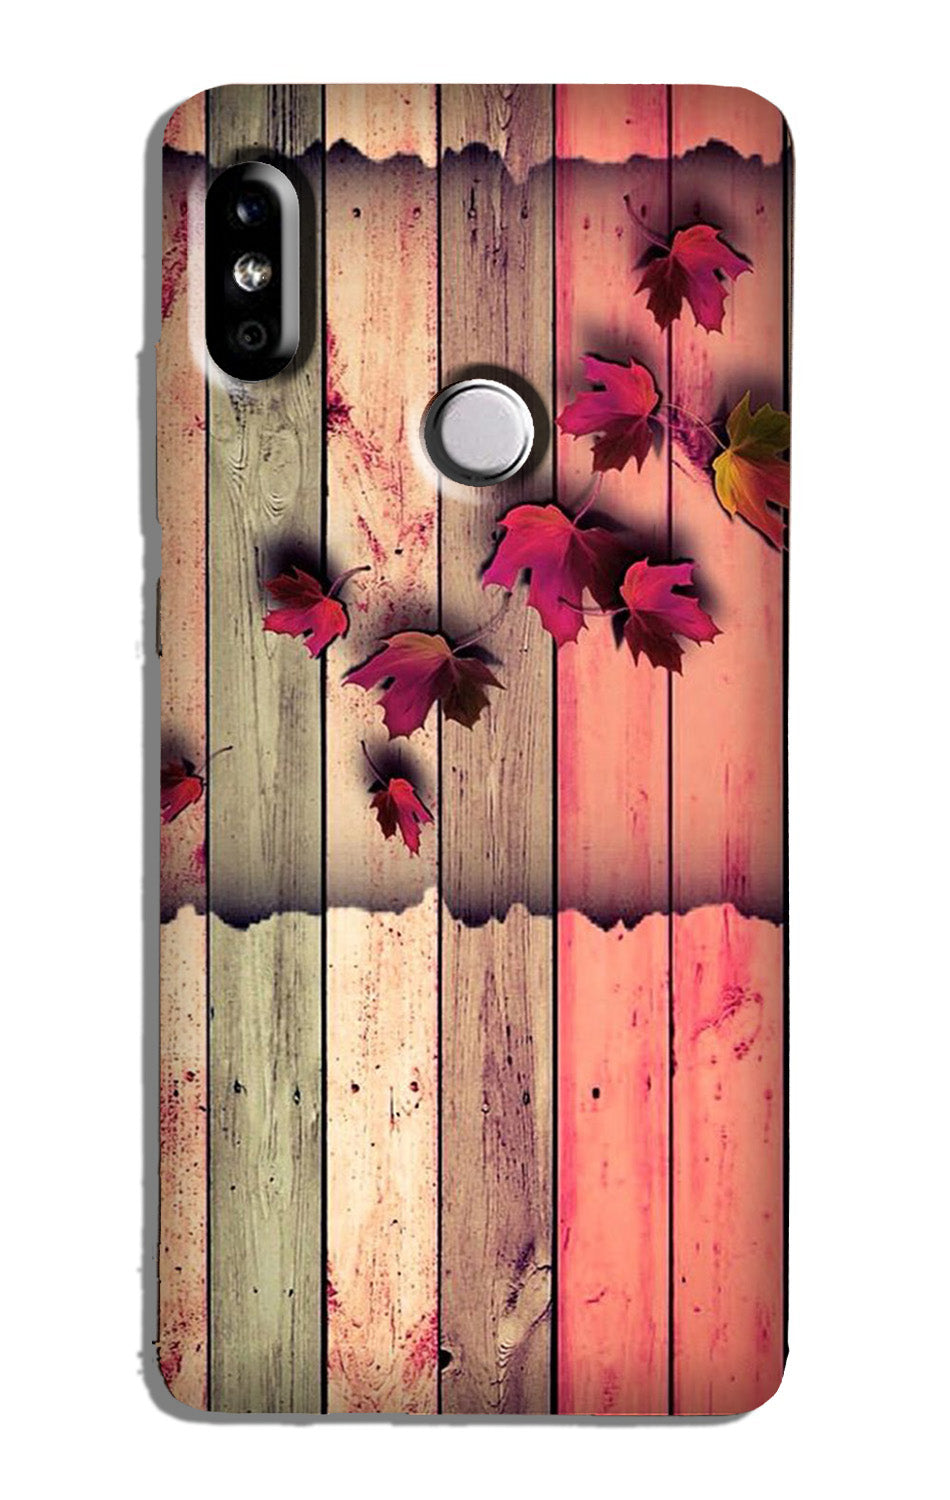 Wooden look2 Case for Redmi Note 6 Pro